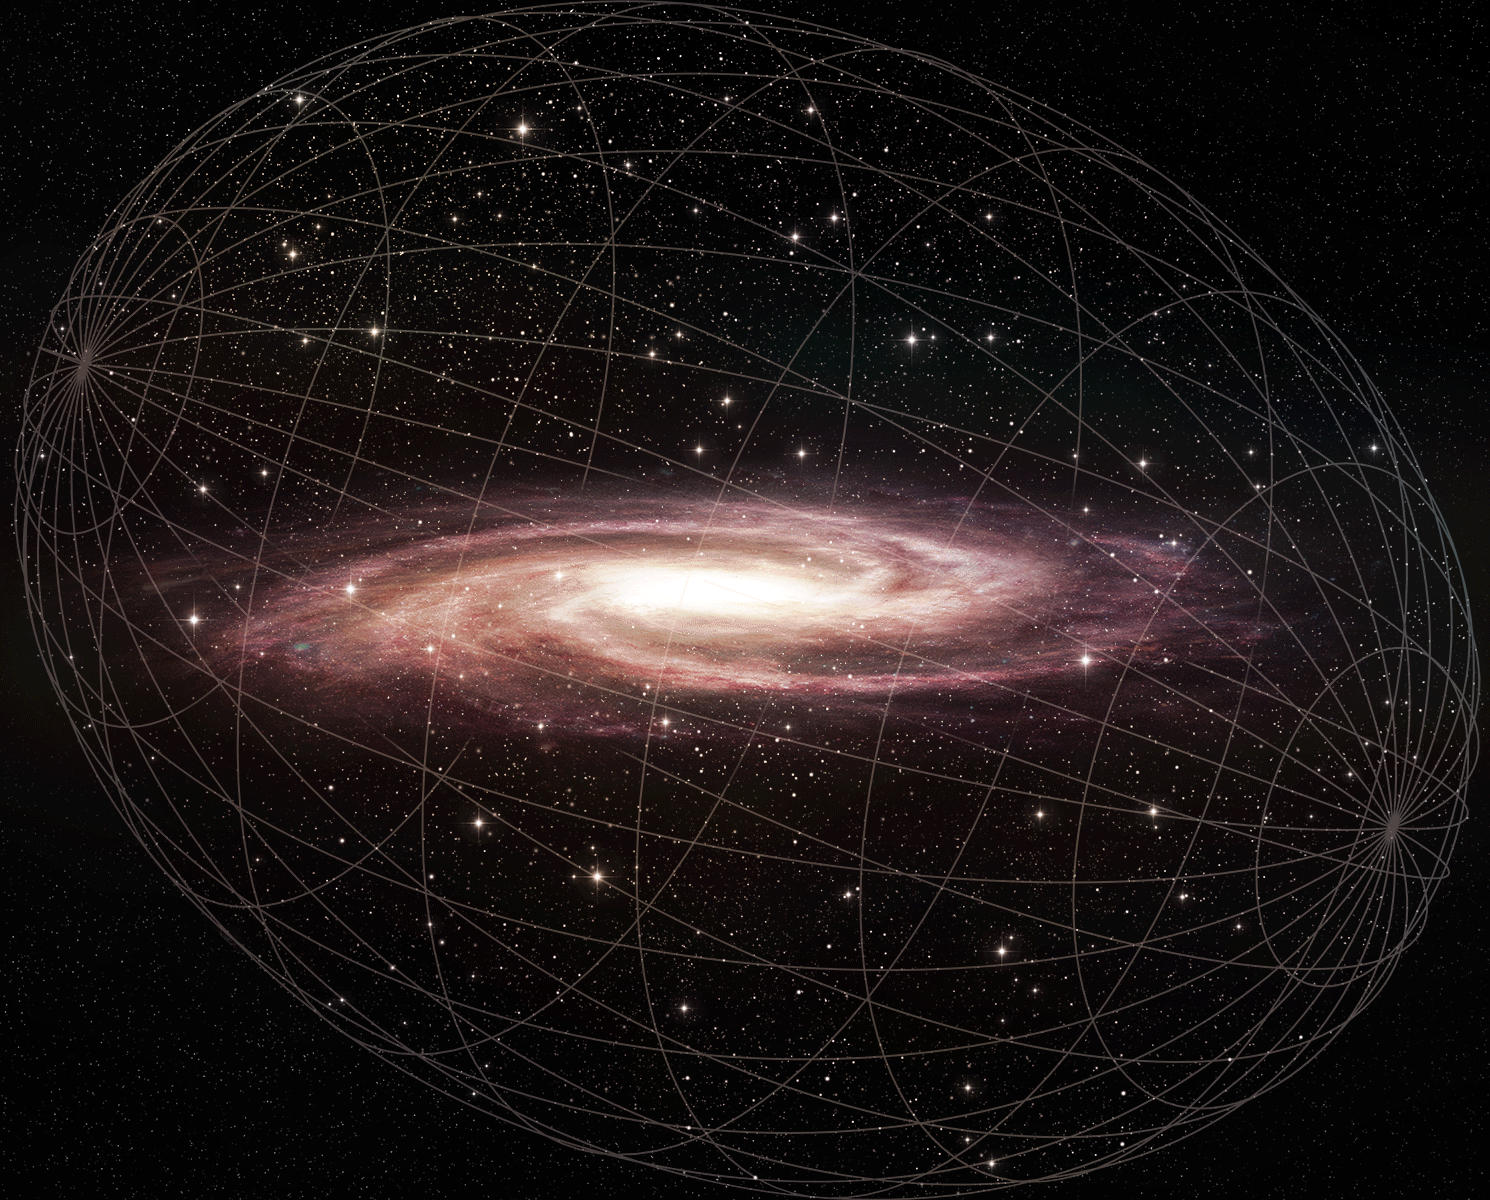 Harvard Astronomers Have Revealed the True Shape of the Milky Ways Halo of Stars